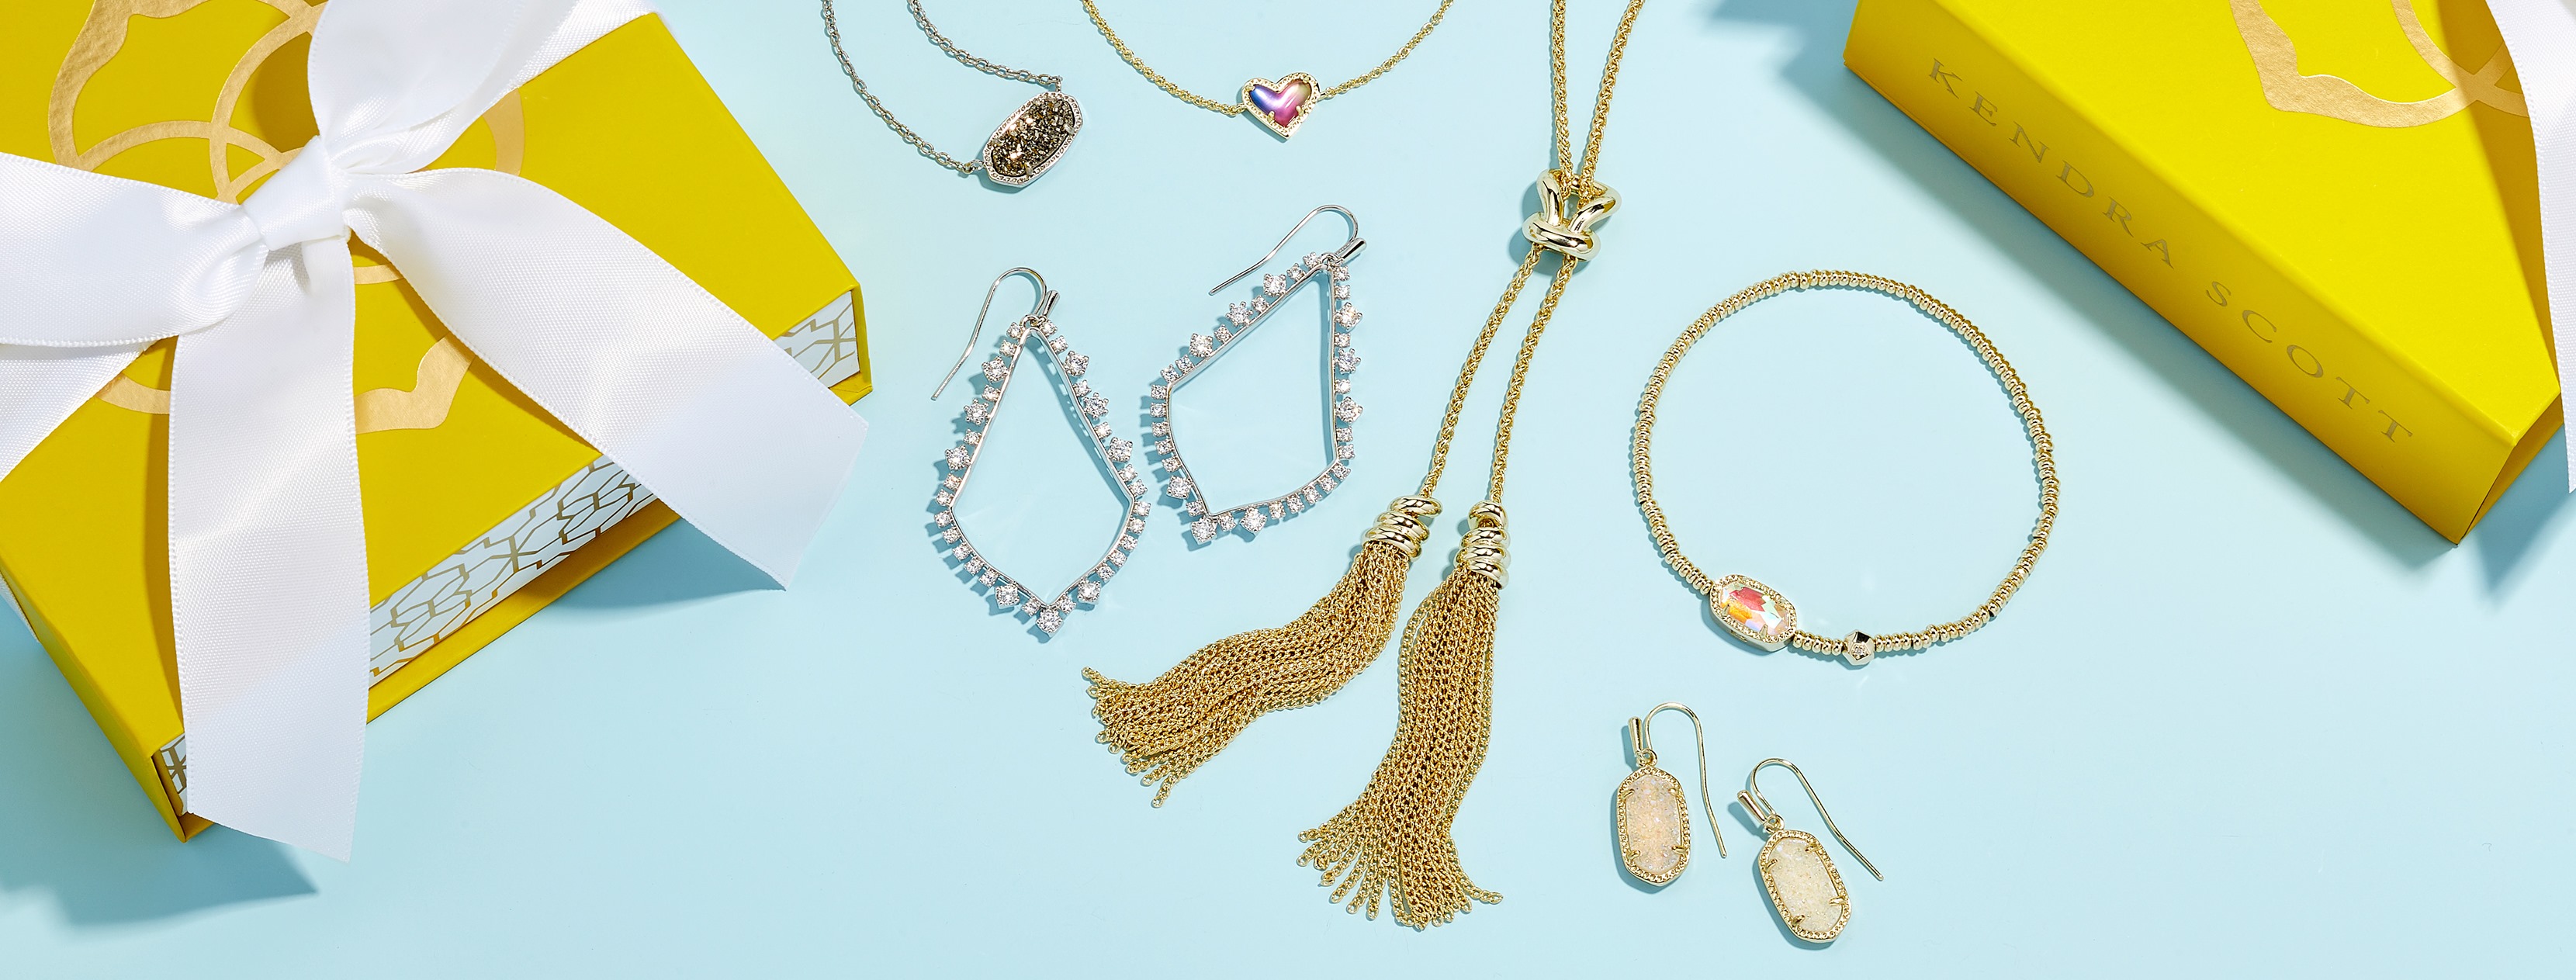 Photograph of two bright yellow gift boxes with white bows on an aqua background framing the right and left sides of the picture. In the center are several pieces of jewelry; gold chain necklace with glittery pendant, gold chain necklace with pink heart pendant, tear drop shaped gold earrings surrounded with clear crystals, gold chain necklace with doubled gold chain tassels through a bolo style loop, gold beaded bracelet with orange pendant, and small gold earrings with oval opal stones.